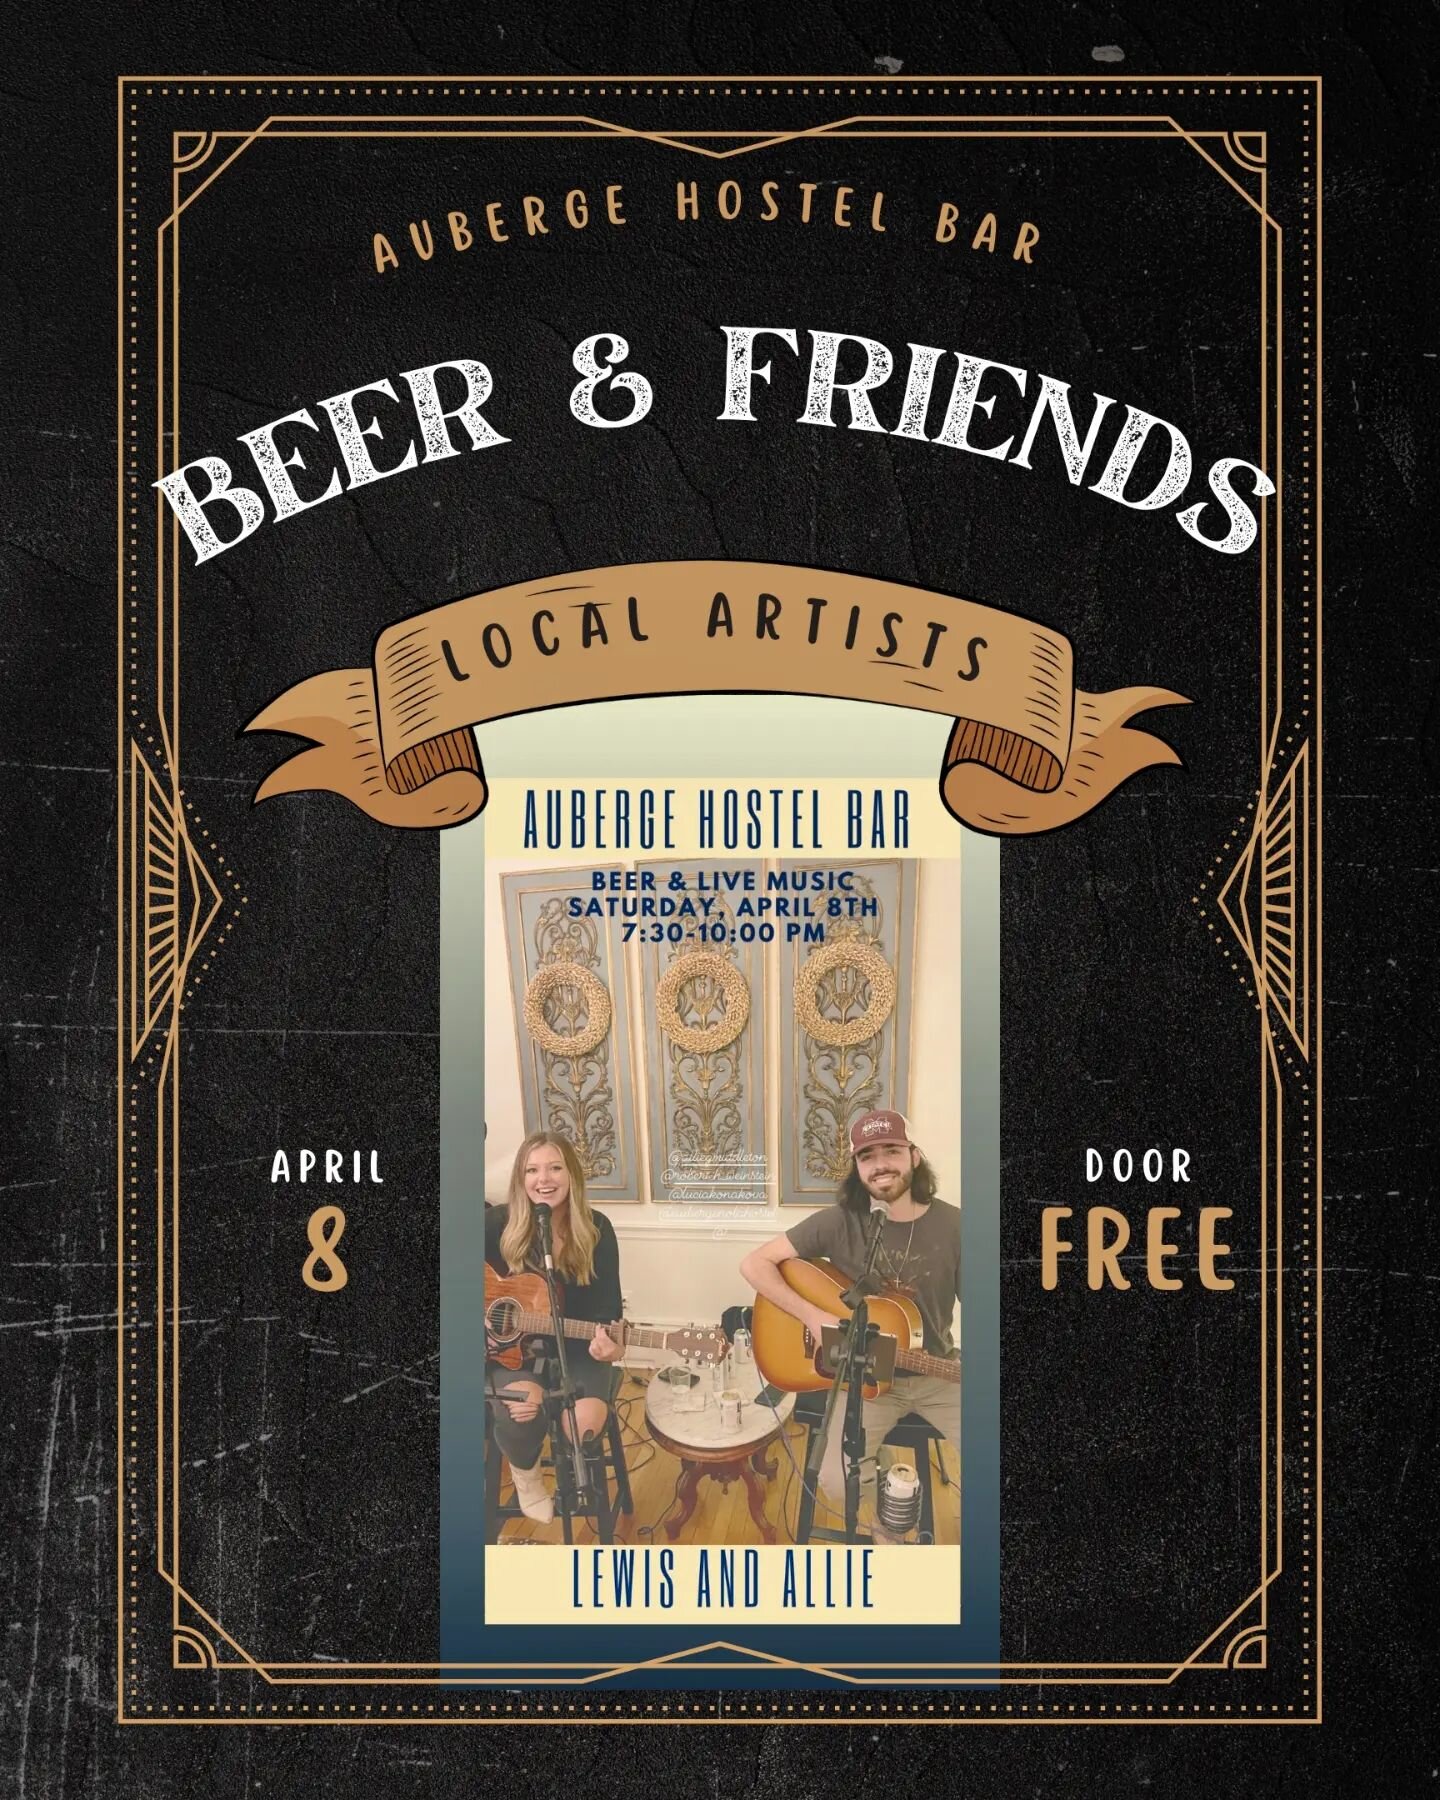 Reminder to mark your Calendars 🍻 We'll have two great local artists at the hostel on April 8th for an evening of Beer and 🎶 #music #visitclarksdale #beer #Hostelworld